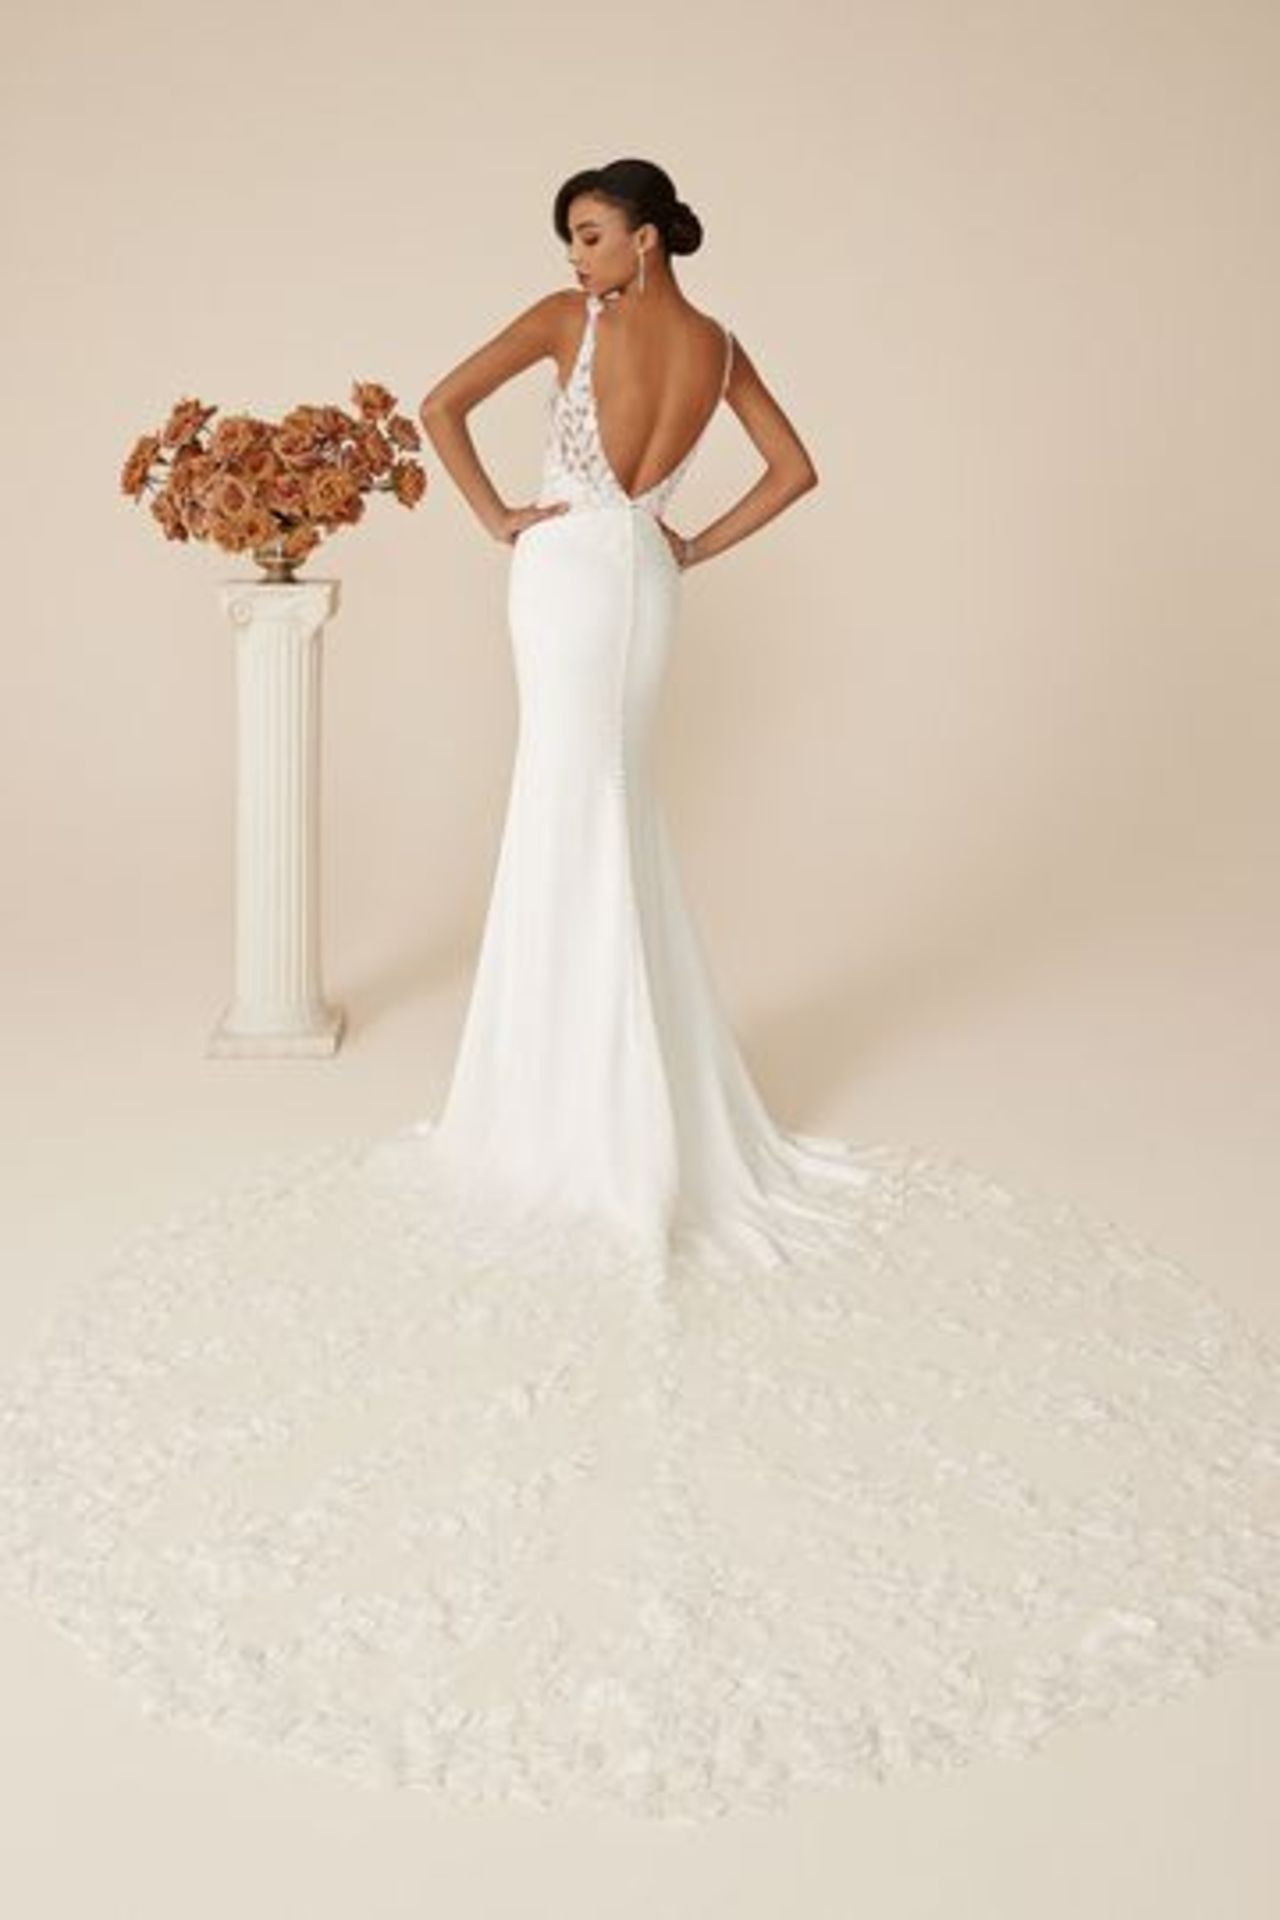 1 x Justin Alexander Alivia Designer Crepe Wedding Gown With Cathedral Train - Size 12 - RRP £1,654 - Image 7 of 14